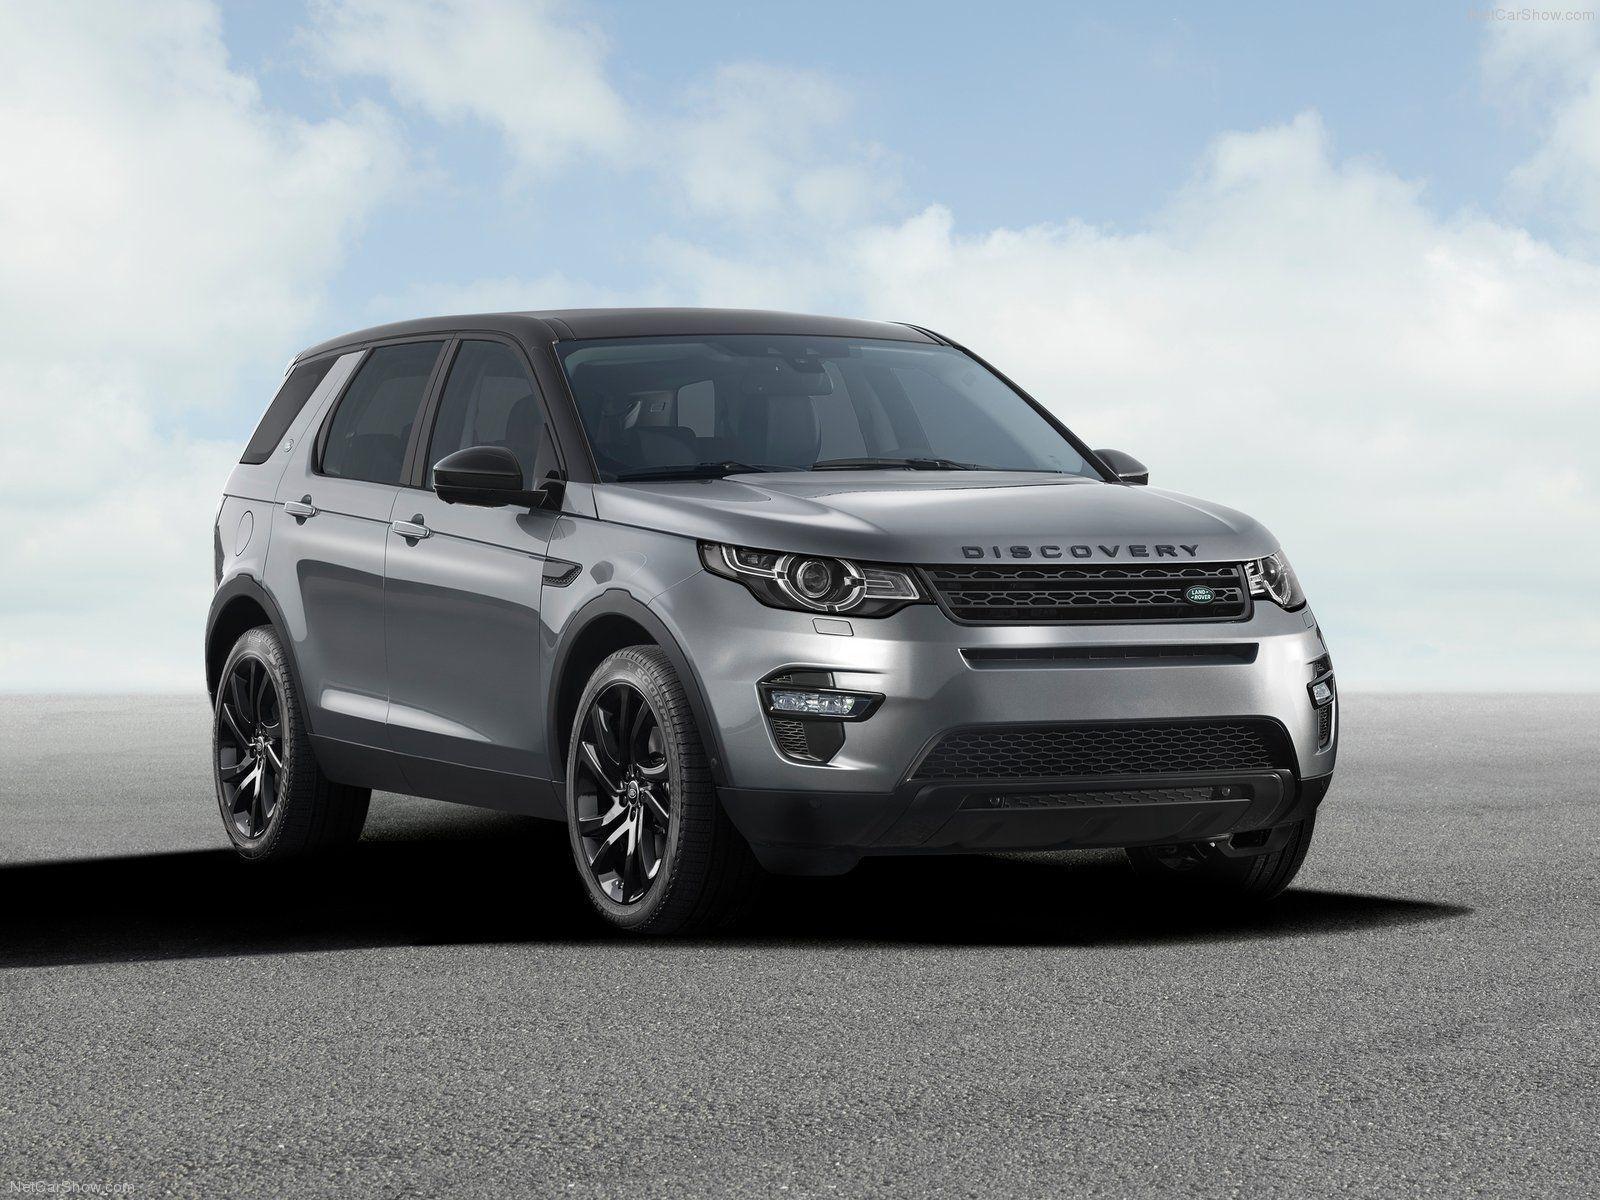 discovery Land rover Sport suv wallpaperx1200